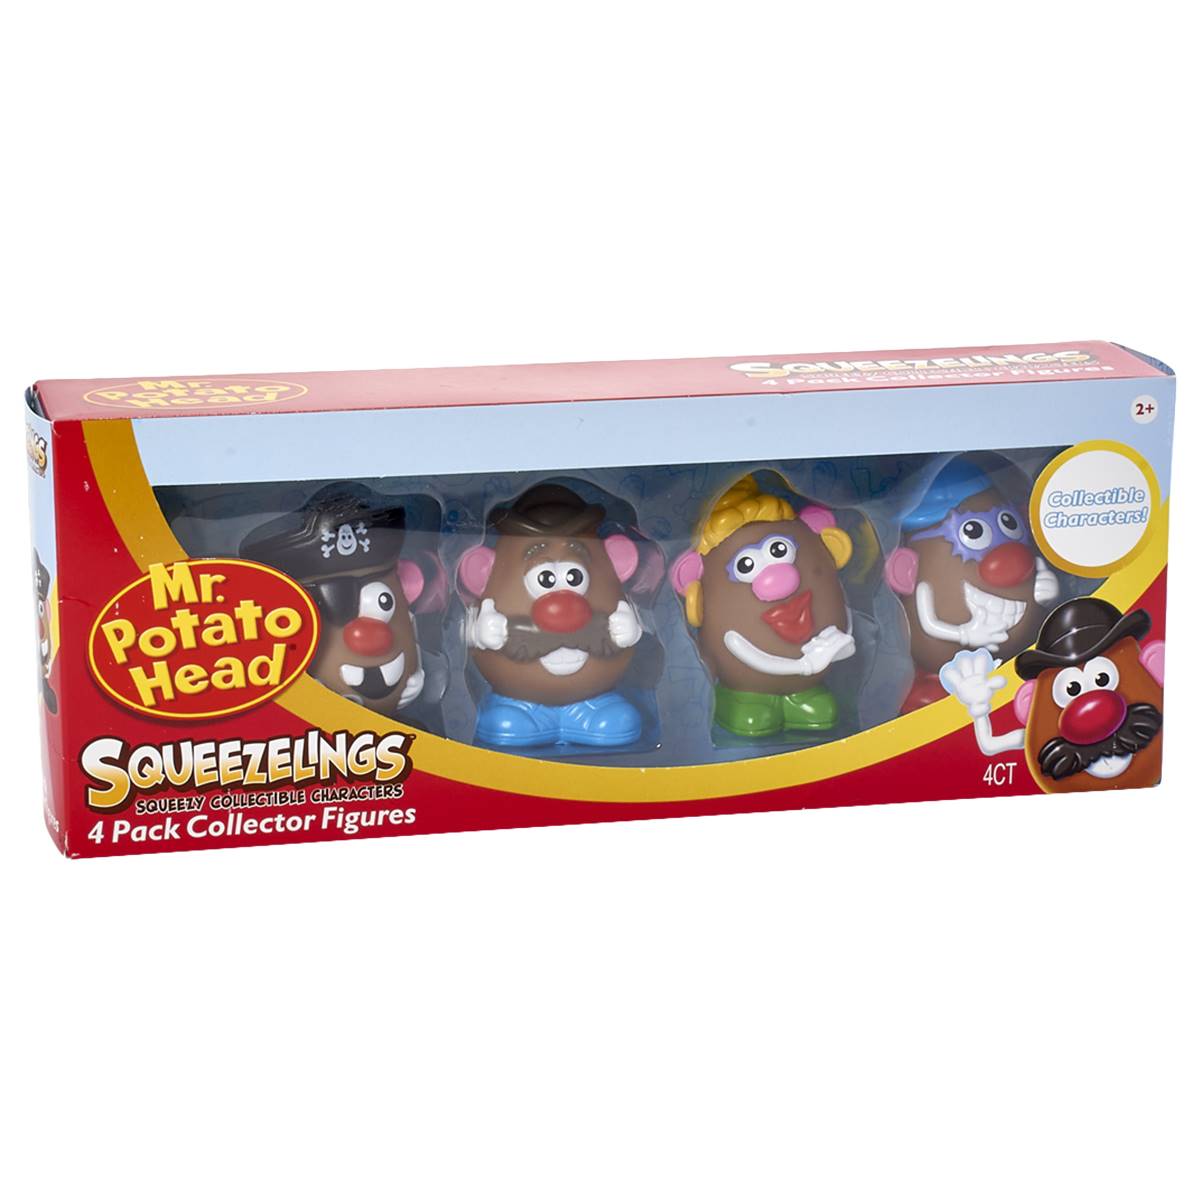 Mr. Potato Head Squeezeling Collector Figures